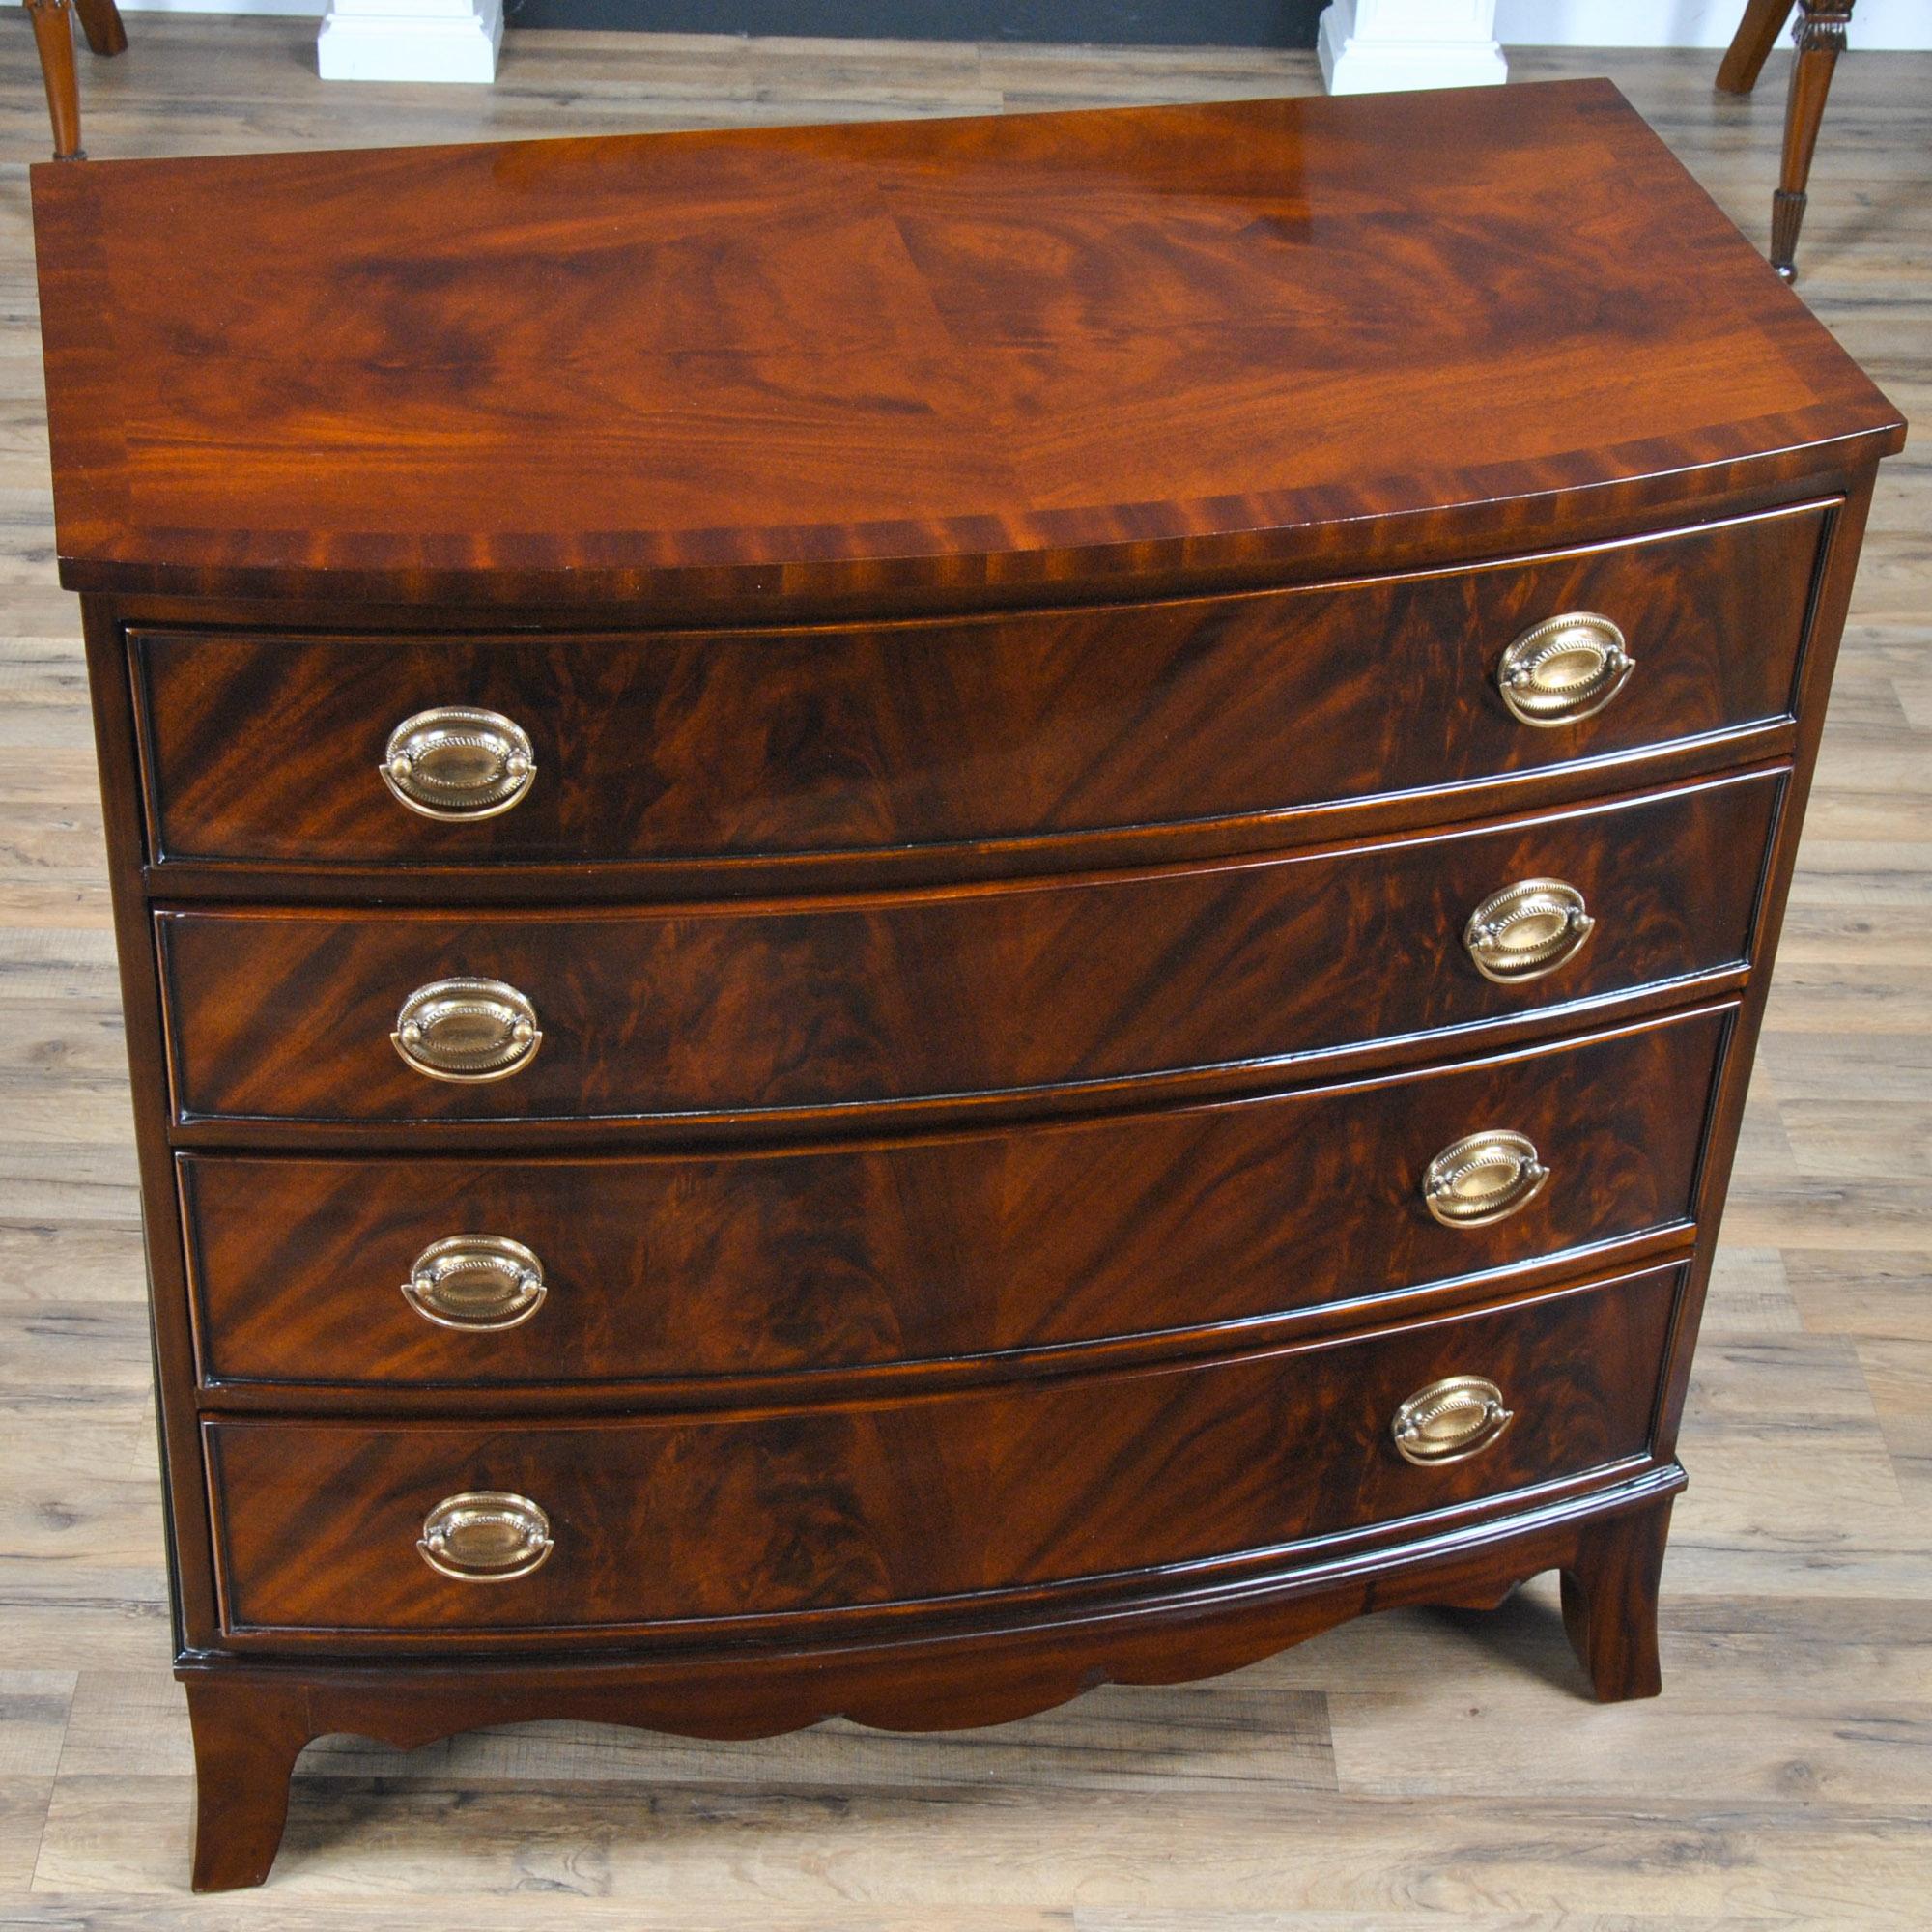 An outstanding mahogany four drawer chest that is as at home in the bedroom as it would be in a front entrance, living room or home office. Elegant design and great mahogany veneers as well as mahogany solids combine with dovetailed drawers to